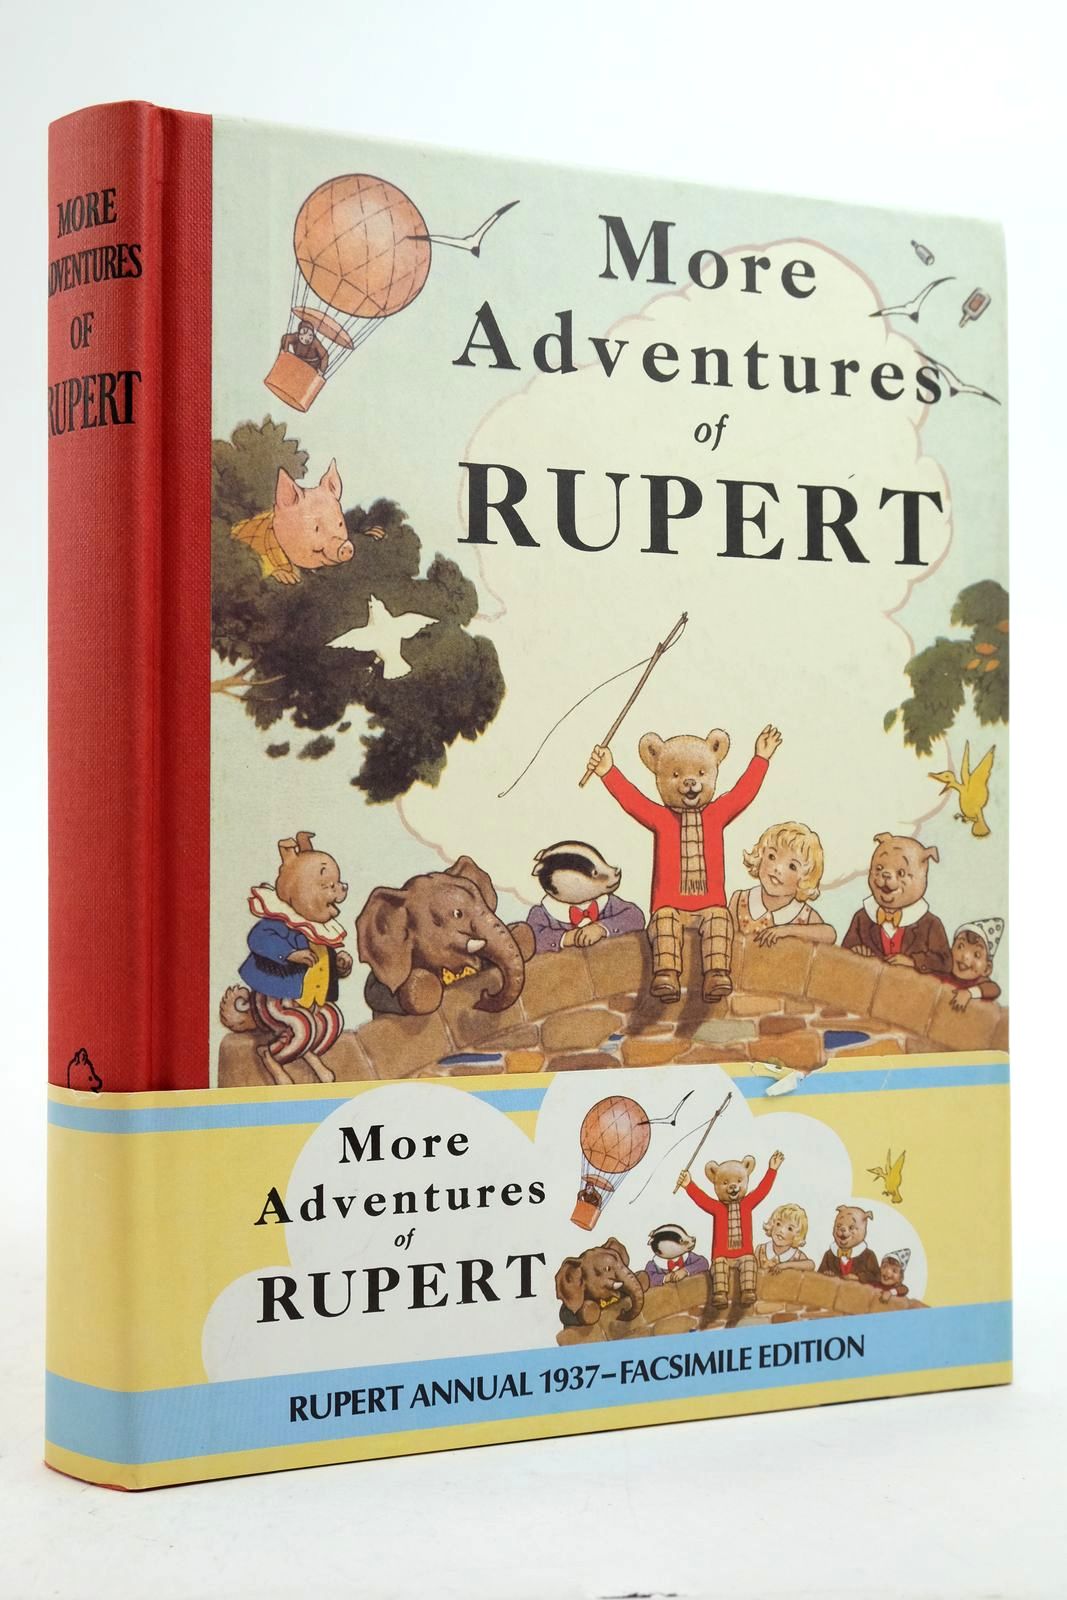 Photo of RUPERT ANNUAL 1937 (FACSIMILE) - MORE ADVENTURES OF RUPERT written by Bestall, Alfred illustrated by Bestall, Alfred published by Express Newspapers Ltd. (STOCK CODE: 2139510)  for sale by Stella & Rose's Books